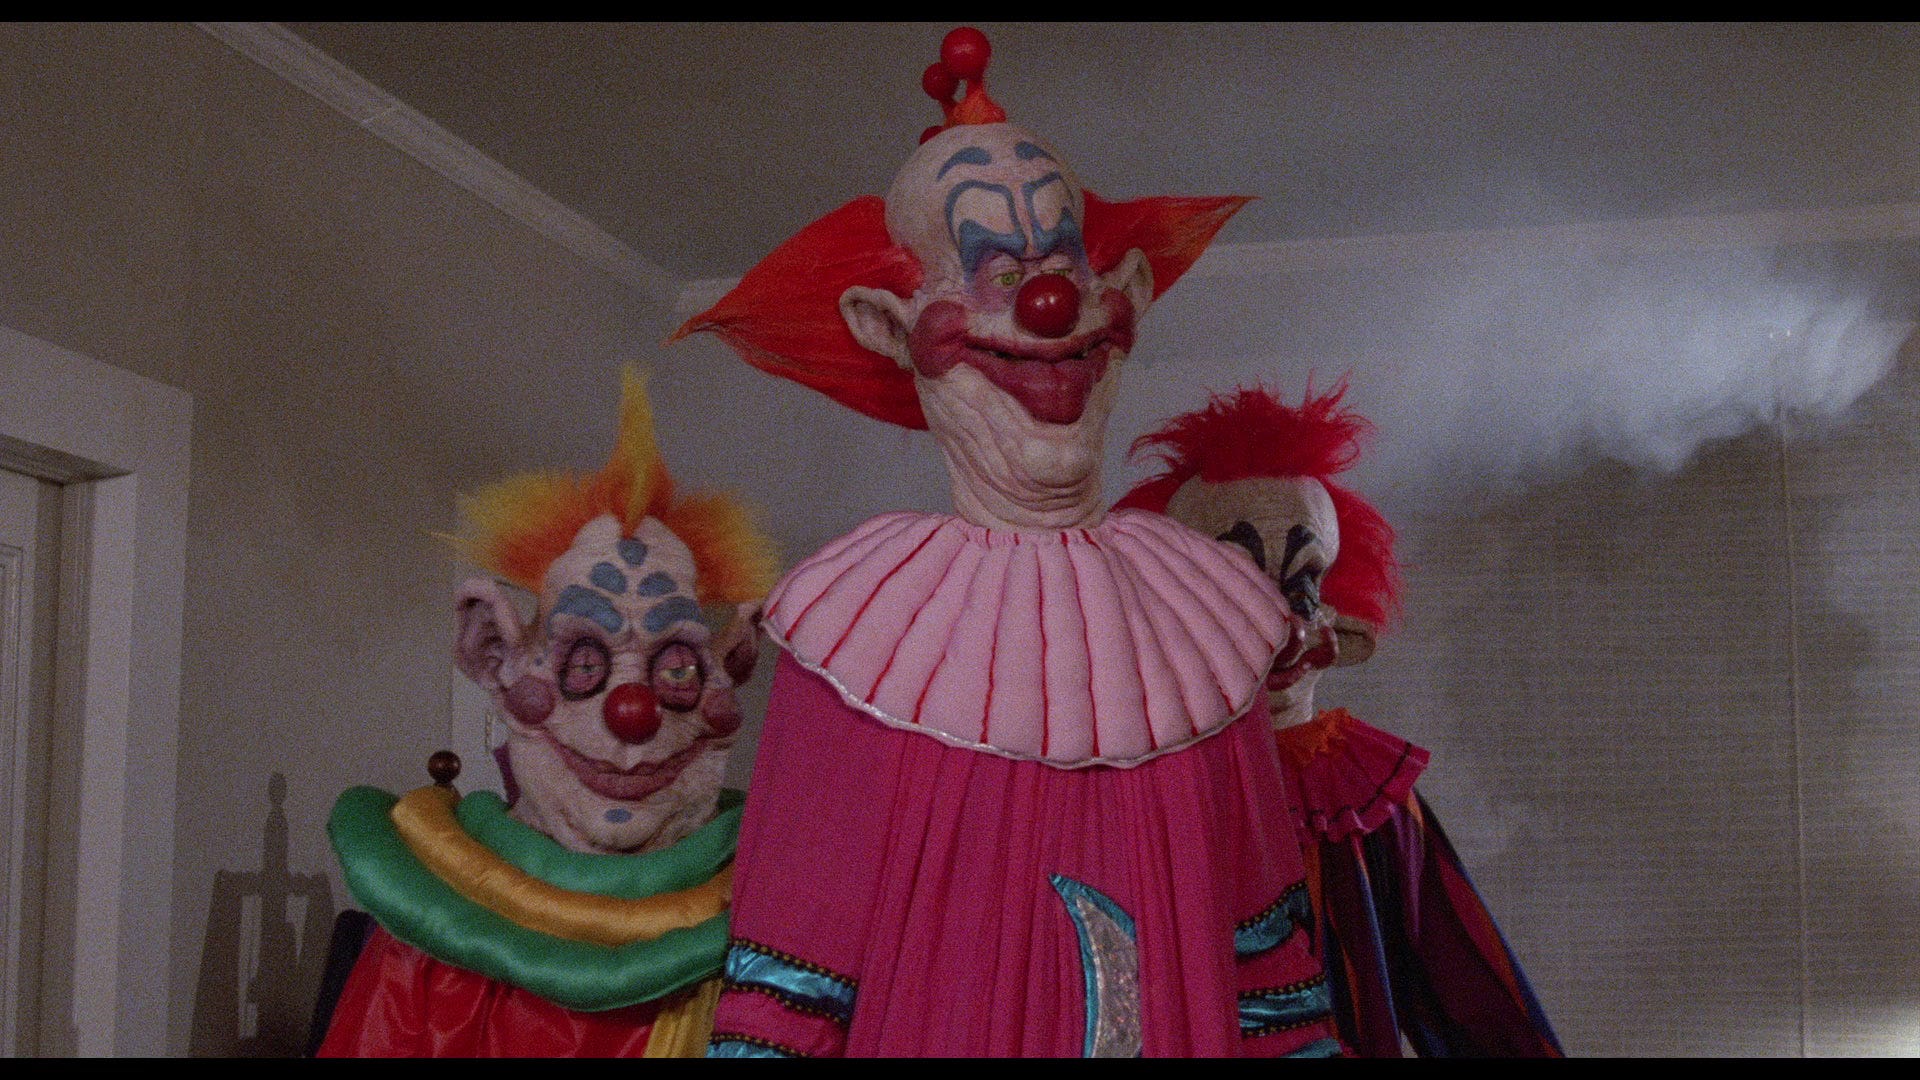 Killer Klowns from Outer Space (1988) • Blu-ray [Arrow Video] | by Dan ...